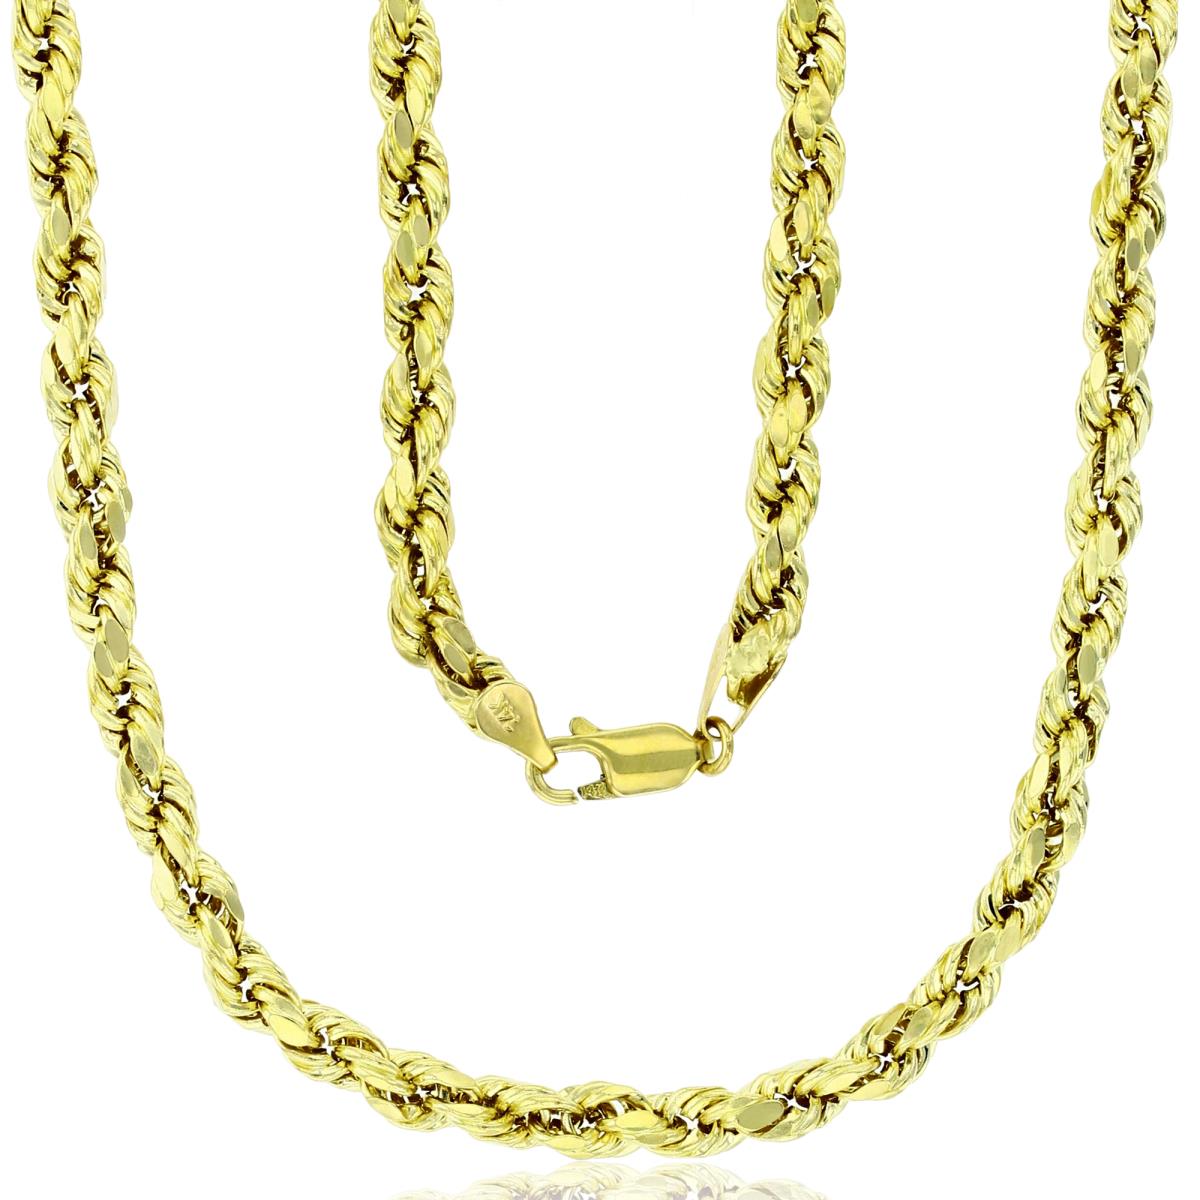 10k Yellow Gold 4.8mm Hollow DC Rope 035 8" Chain Bracelet